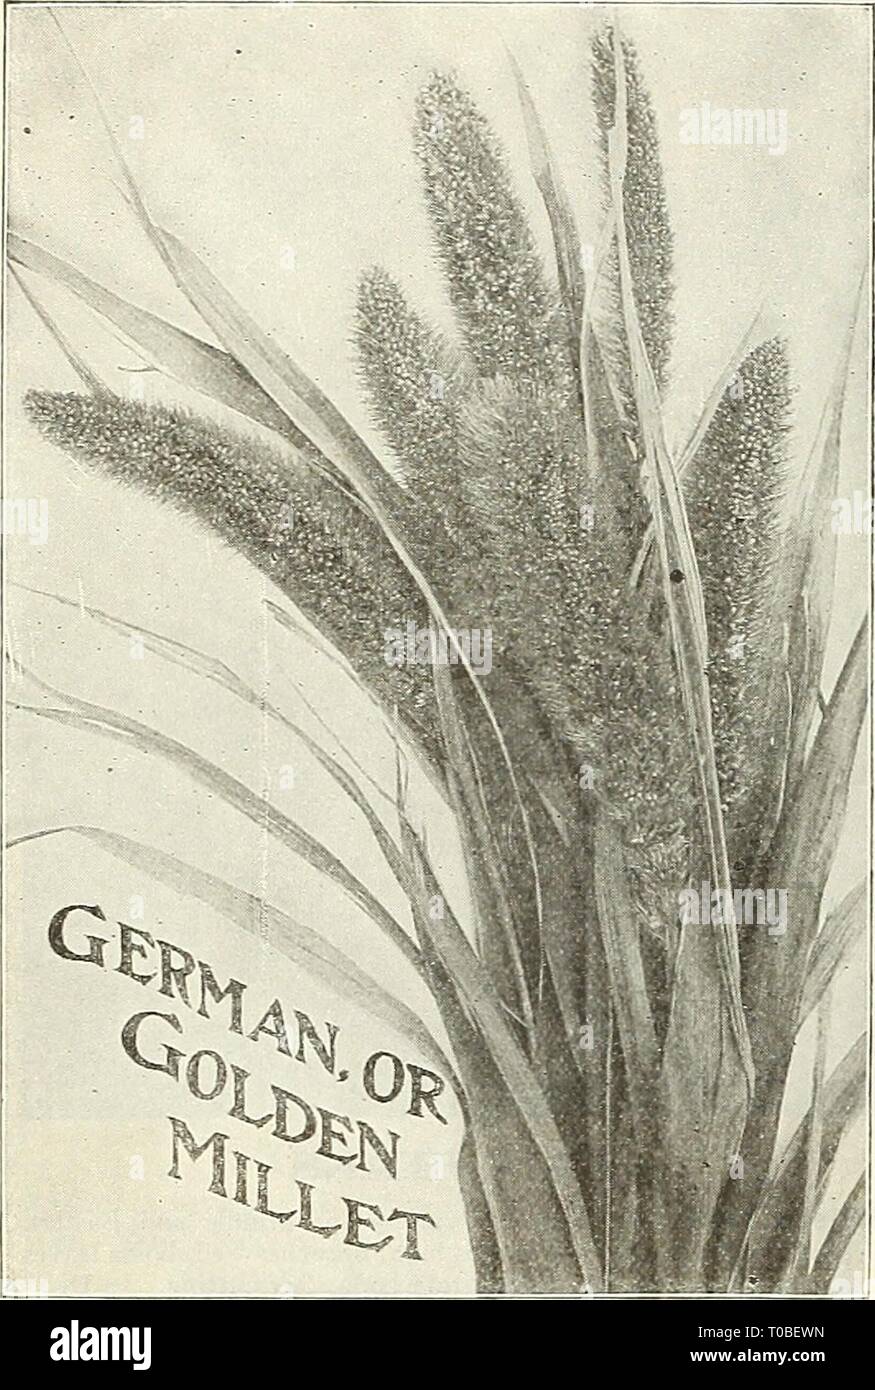 Dreer's garden book 1923 (1923) Dreer's garden book 1923 dreersgardenbook1923henr Year: 1923  50 flEnRyABREEl RELIABLE FARM SEEDS &gt;mLaeiPHRR FIELD, FORAGE AND SILO SEEDS Prices of all Farm Seeds are f. o. b. Philadelphia and subject to market changes MILLET German, or Golden Millet iPankum Gcrmanicum). (See cut.) A valuable annual hay and fodder crop. Sow 1 bushel to the acre. Bushel (50 lbs.), write for price. Hungarian Millet {Panicum Hungariensis). An annua! forage plant, earlj' and productive, growing 2 to 3 feet high. Sow 1 bushel to the acre. Bushel (48 lbs.), write for price. Egypti Stock Photo